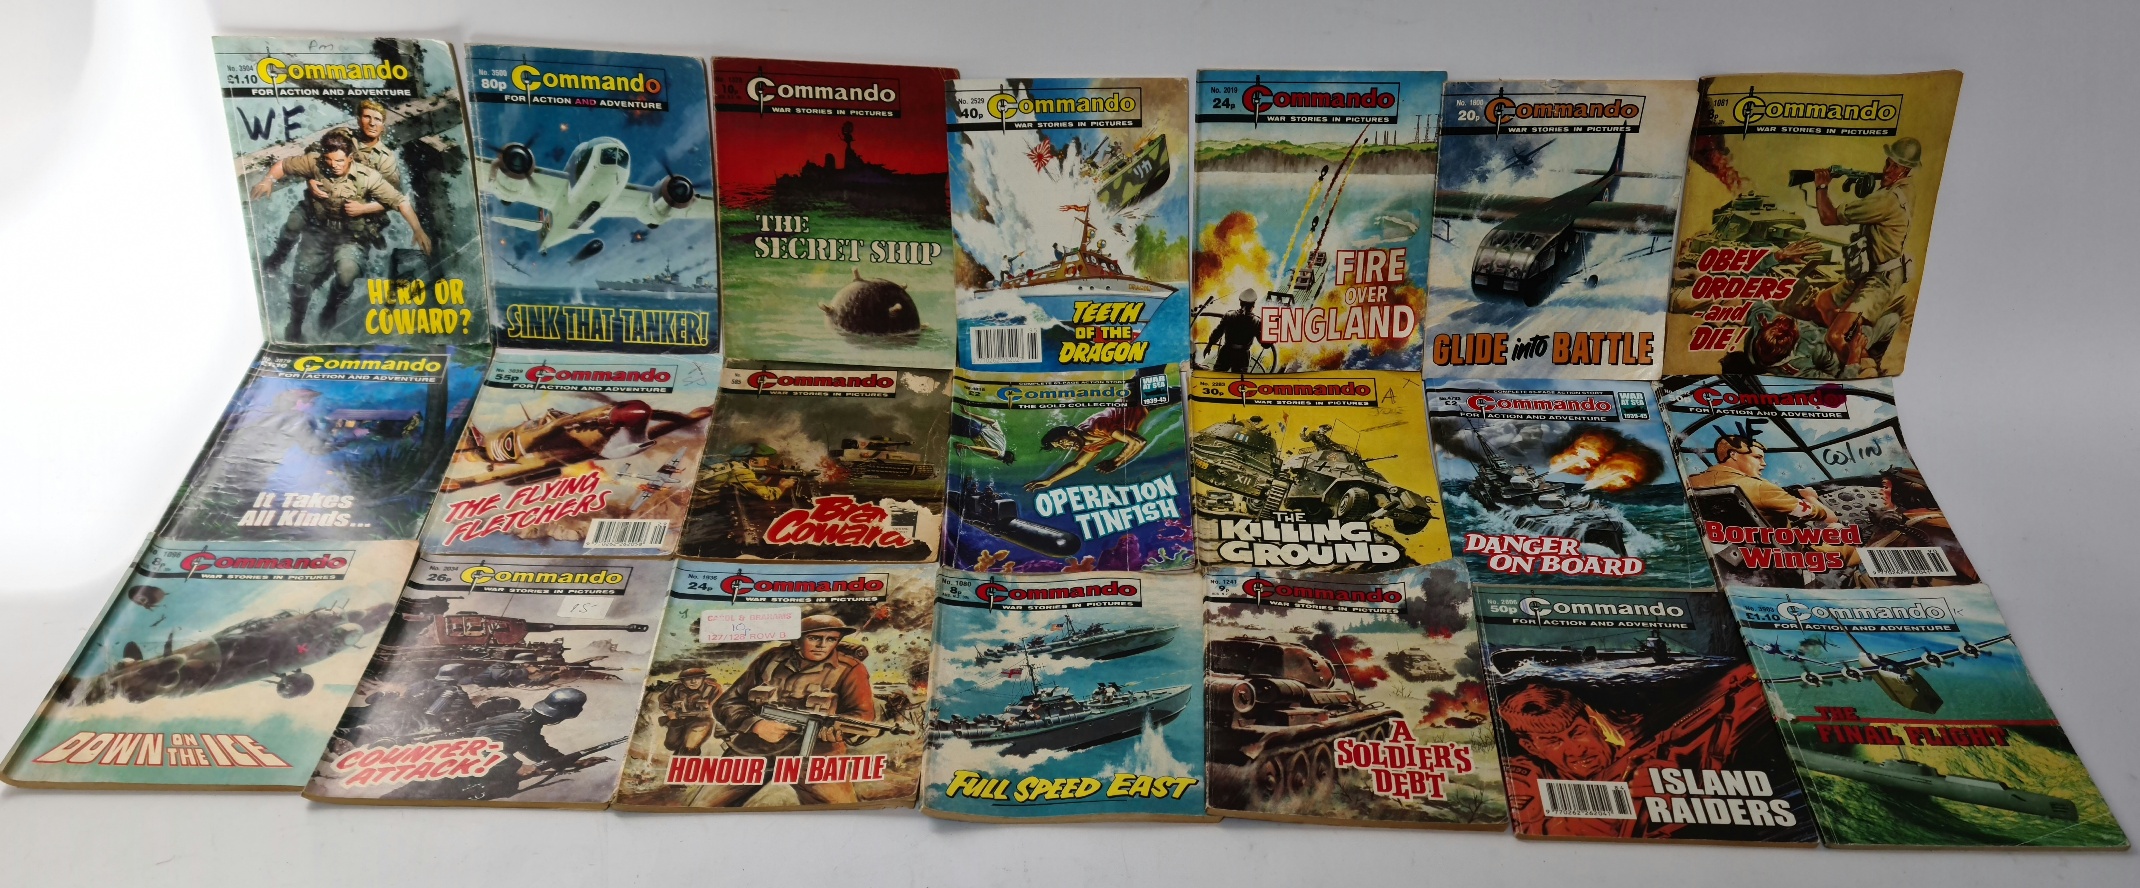 A collection of over 160 commando war comics. - Image 4 of 8